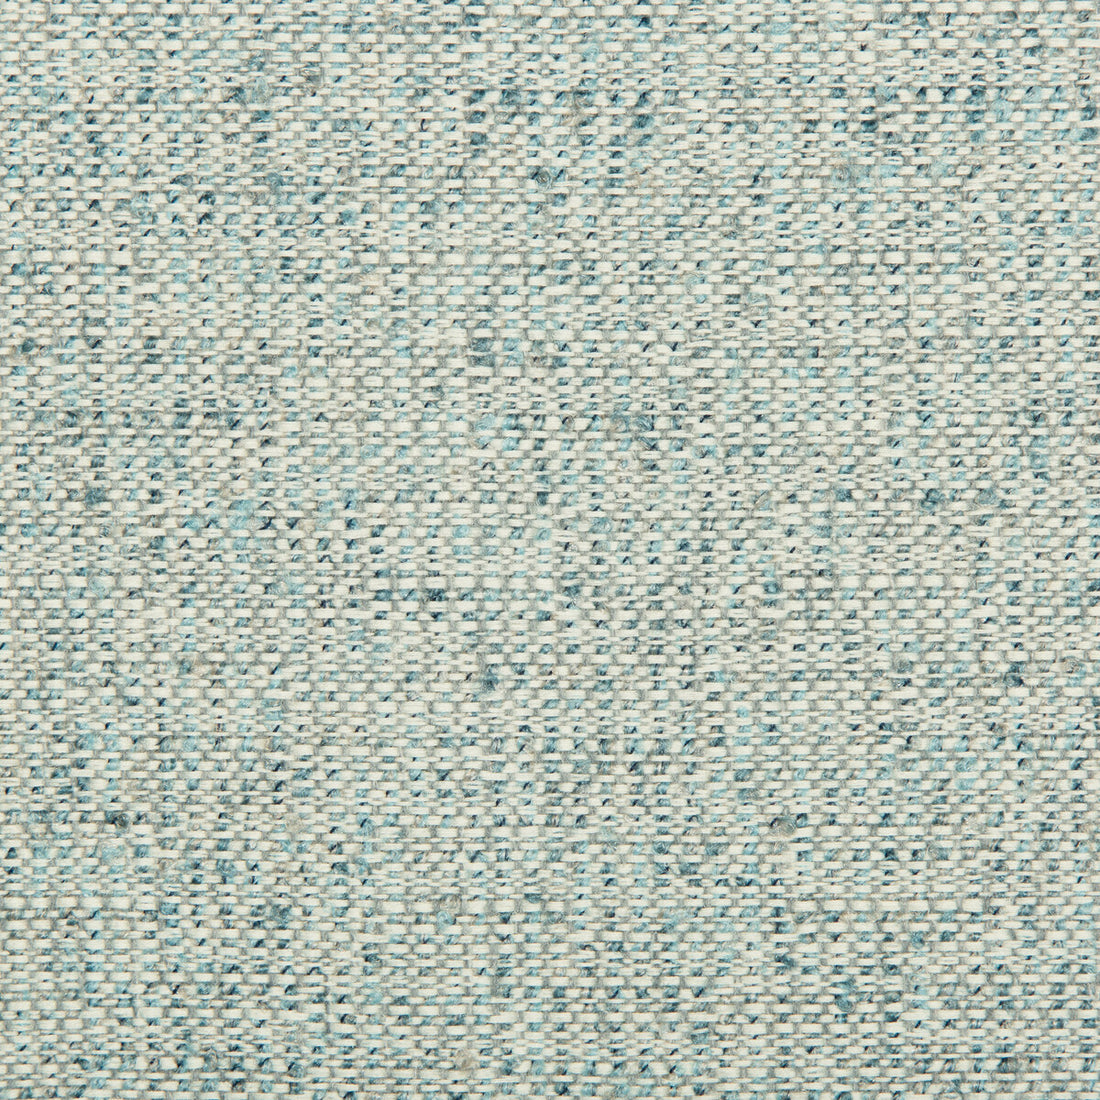 Kravet Contract fabric in 34635-1615 color - pattern 34635.1615.0 - by Kravet Contract in the Crypton Incase collection